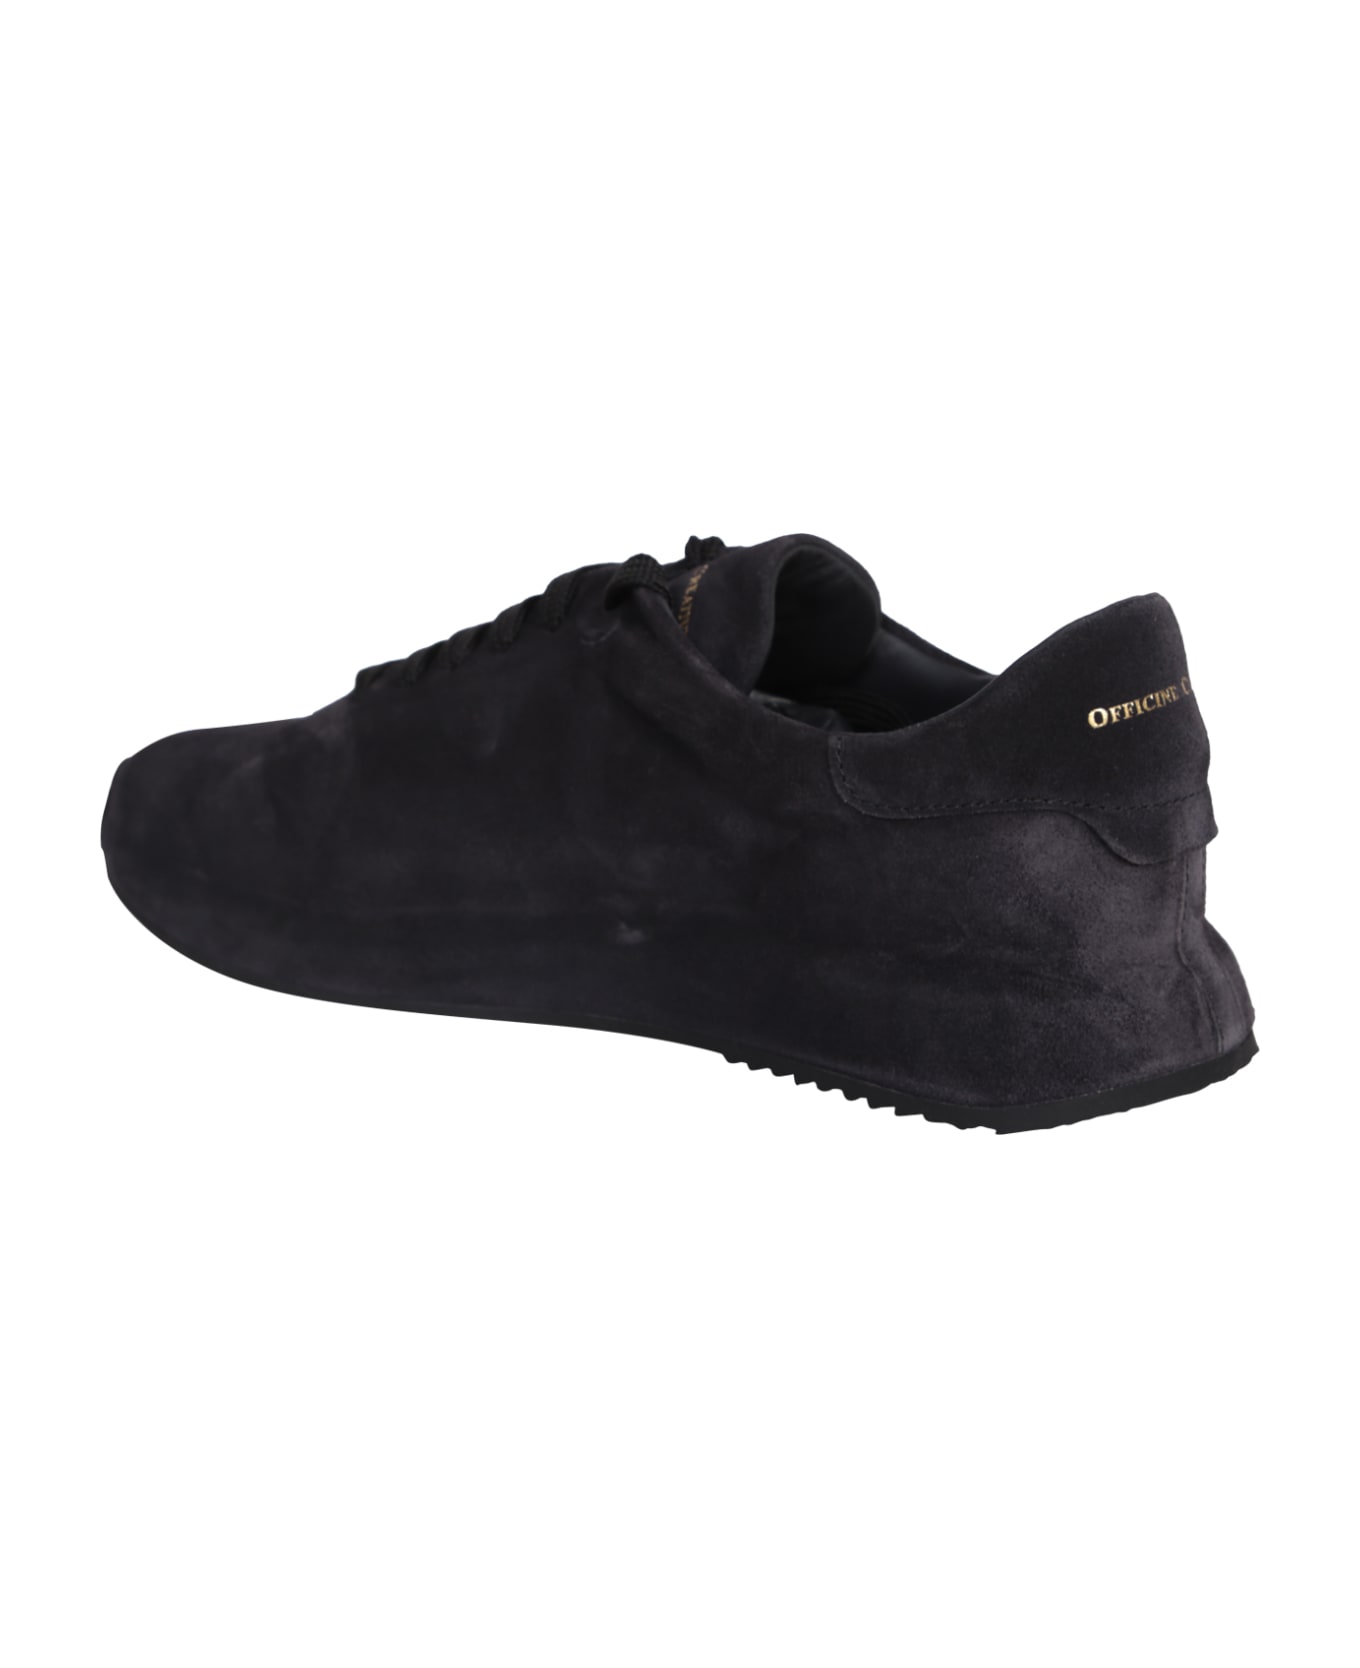 Officine Creative Race Sneakers By Officine Creative With A Contemporary Design - Black